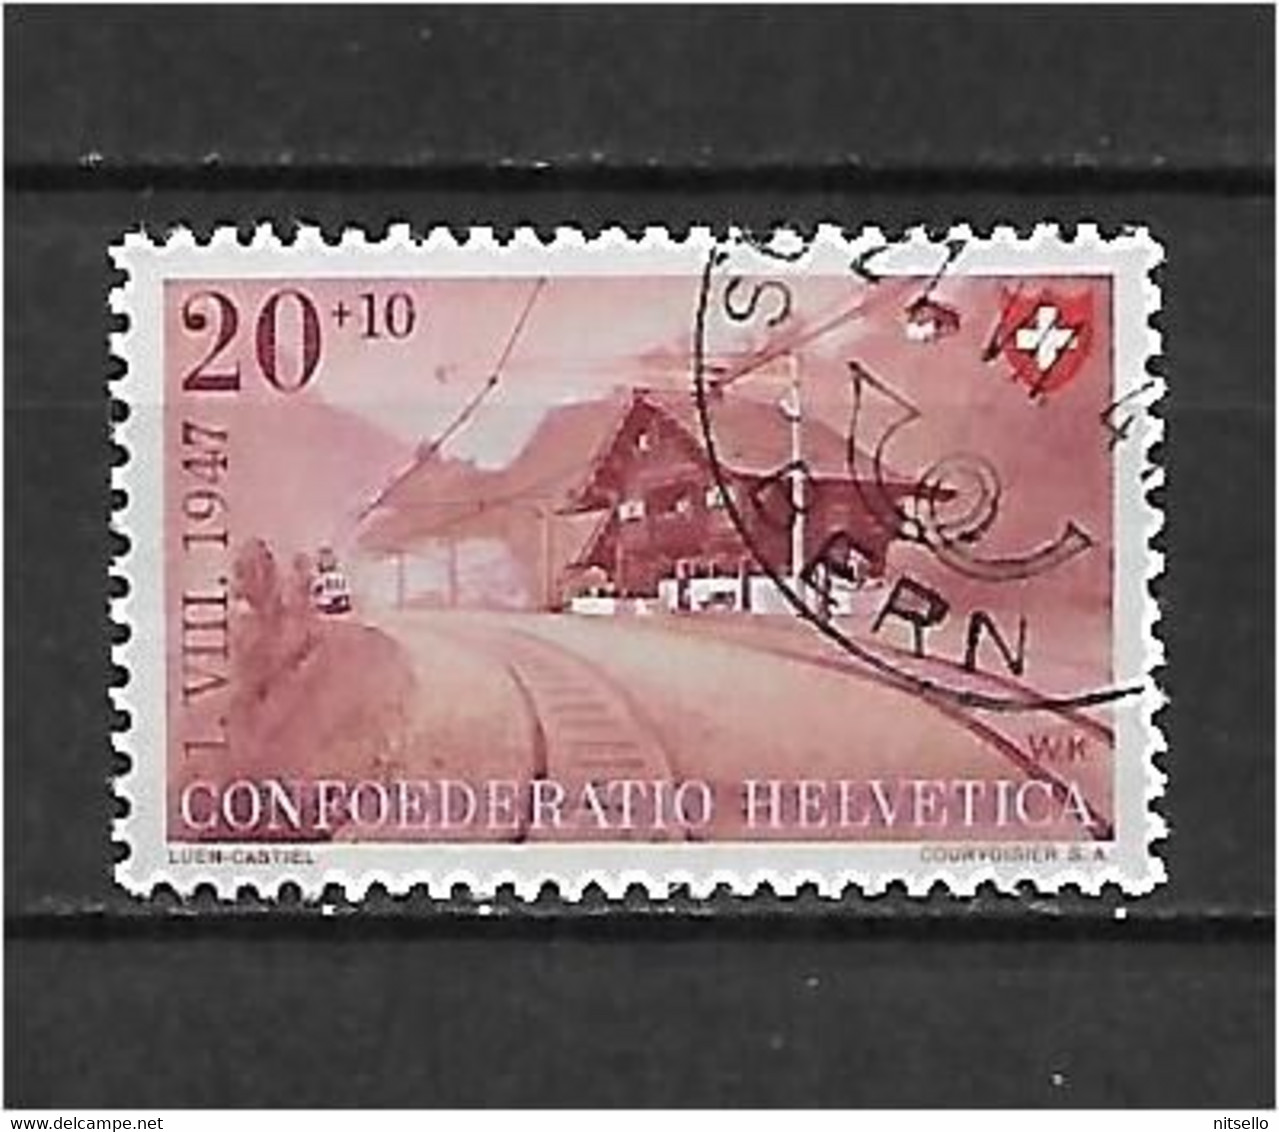 LOTE 1583  /// SUIZA   YVERT Nº: 439  ¡¡¡ OFERTA - LIQUIDATION - JE LIQUIDE !!! - Used Stamps